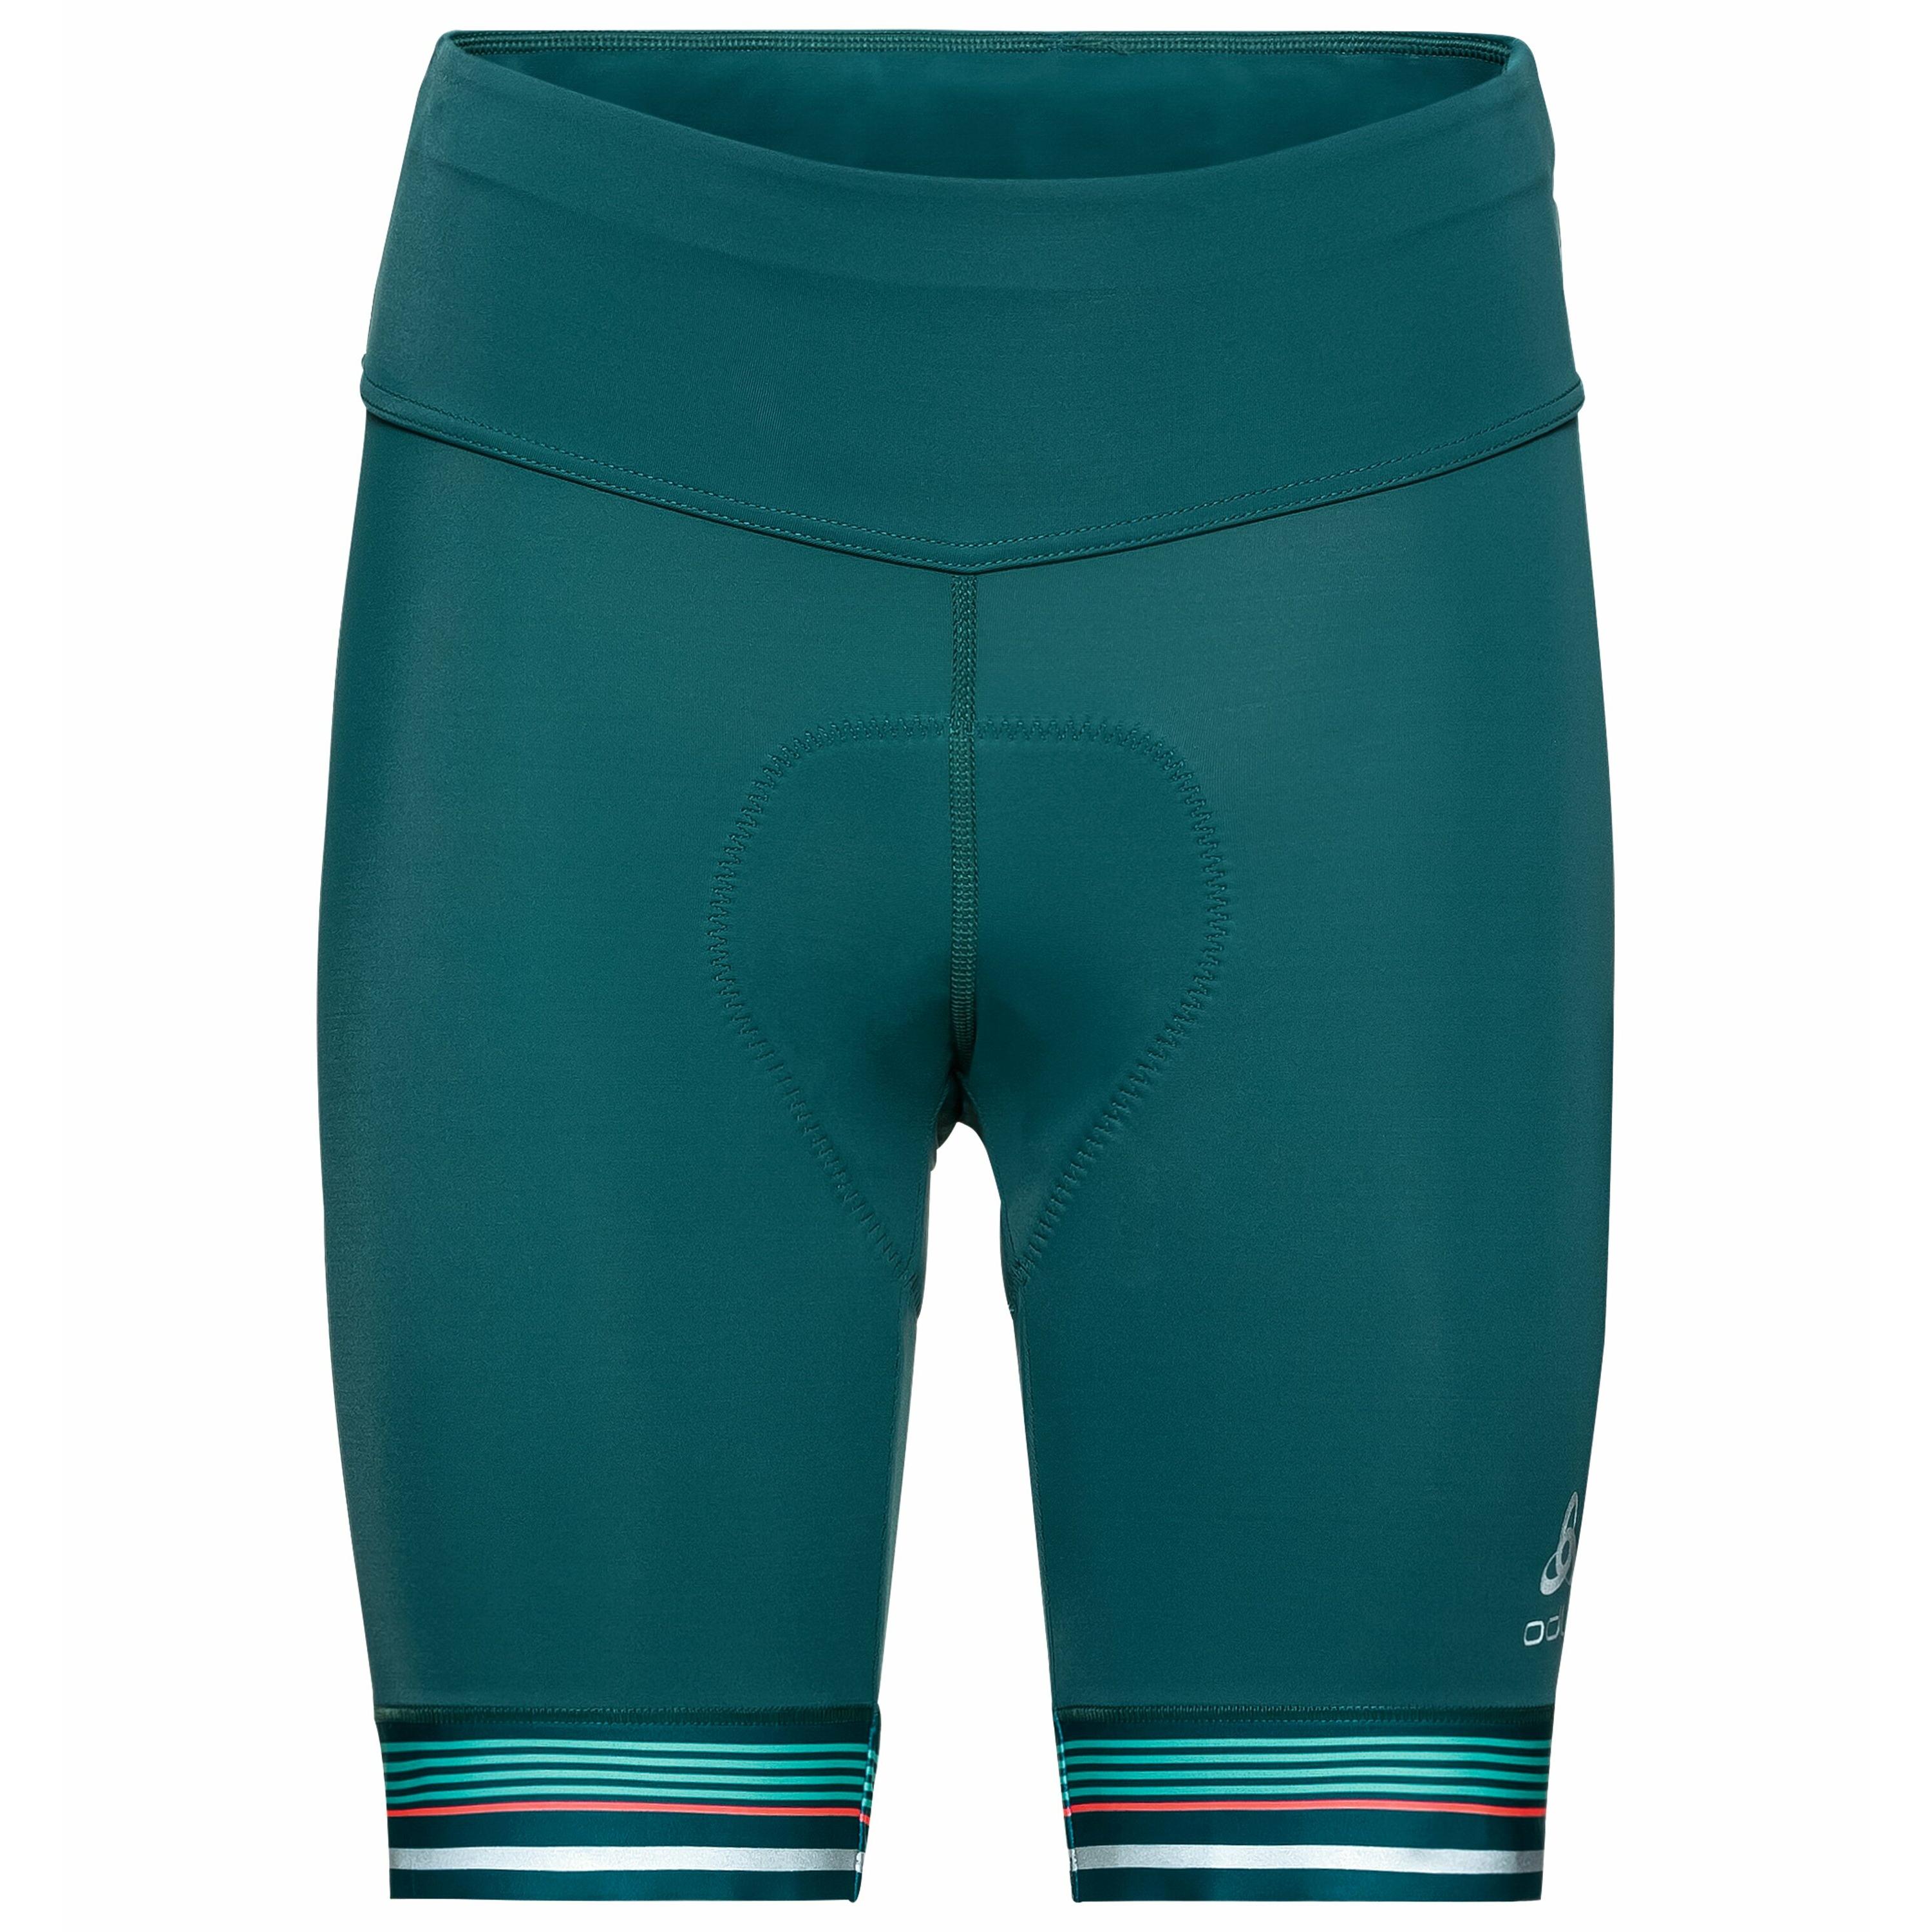 Short Cycle ZEROWEIGHT PRO pour femme